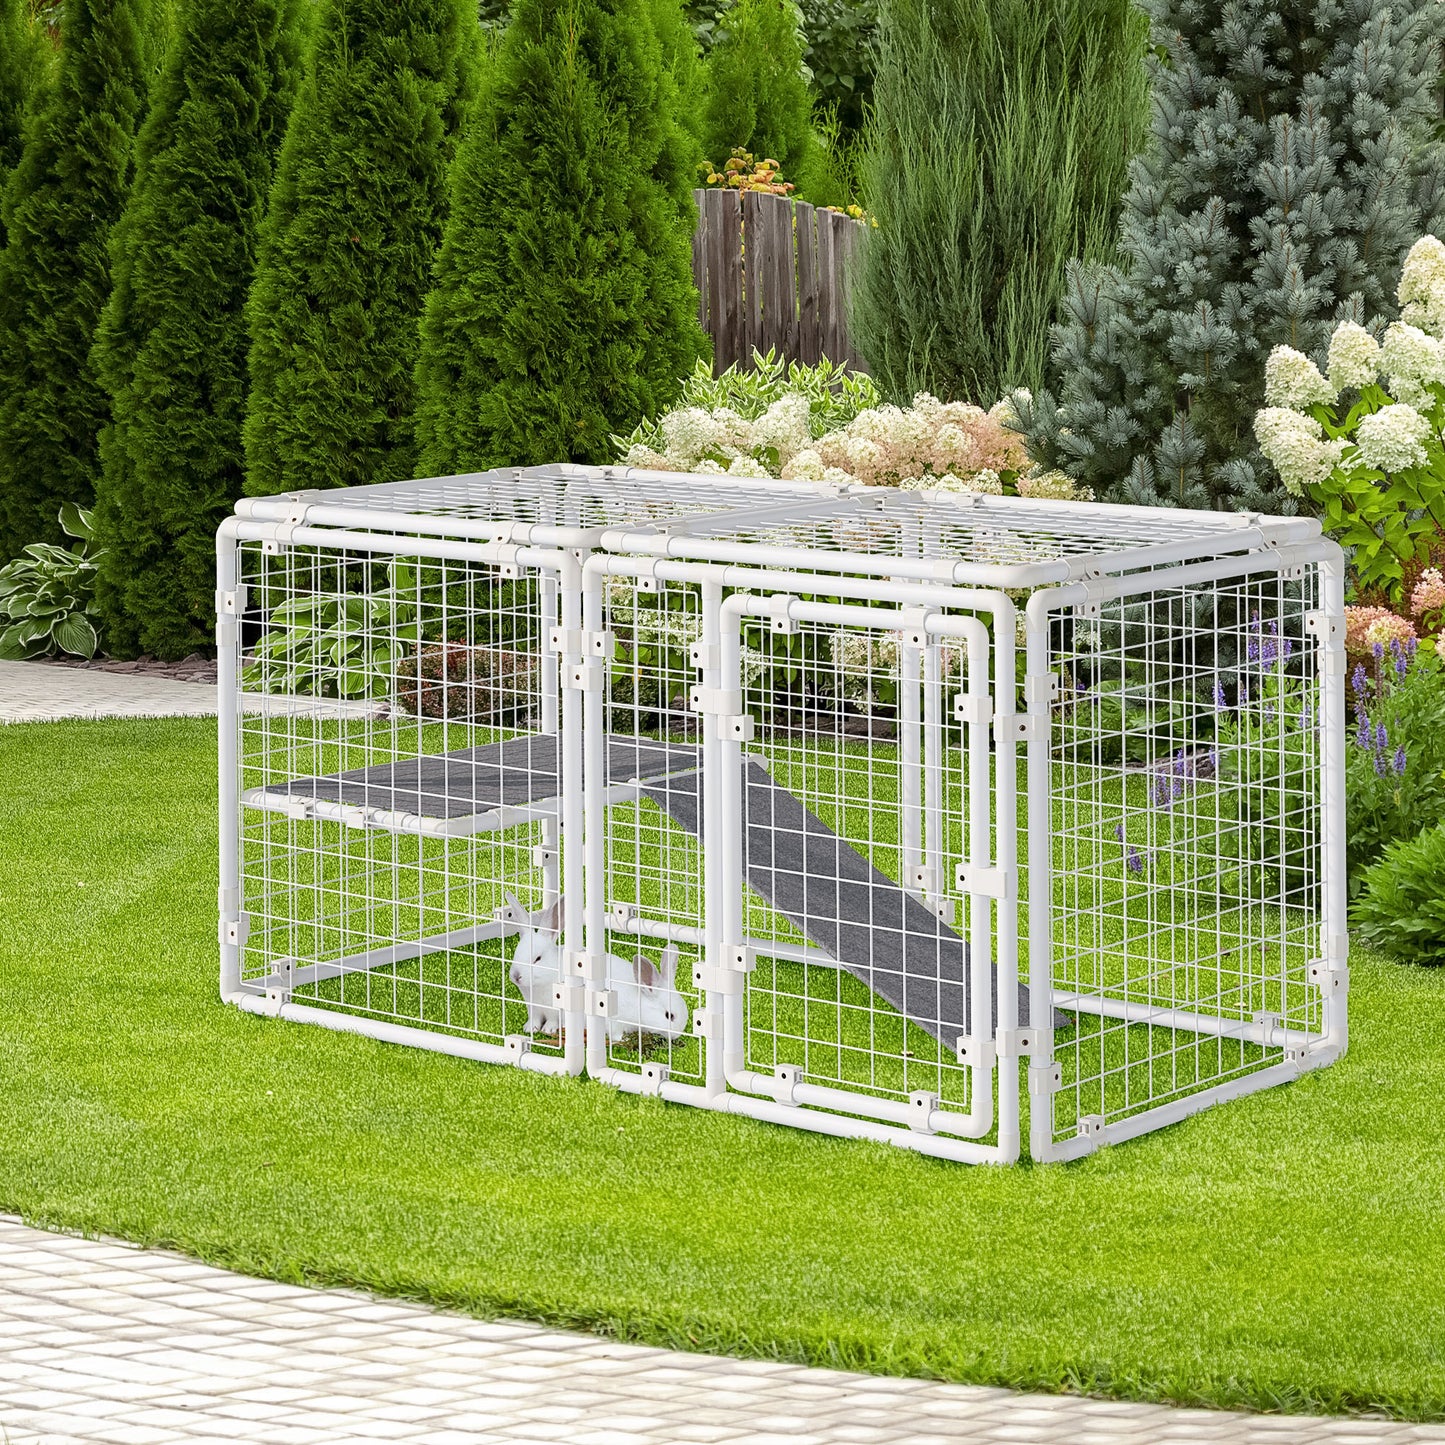 PawHut DIY Rabbit Hutch, 9PCs Guinea Pig Hutch, Large Bunny Cage with Door, Ladder, Divider for Small Animals